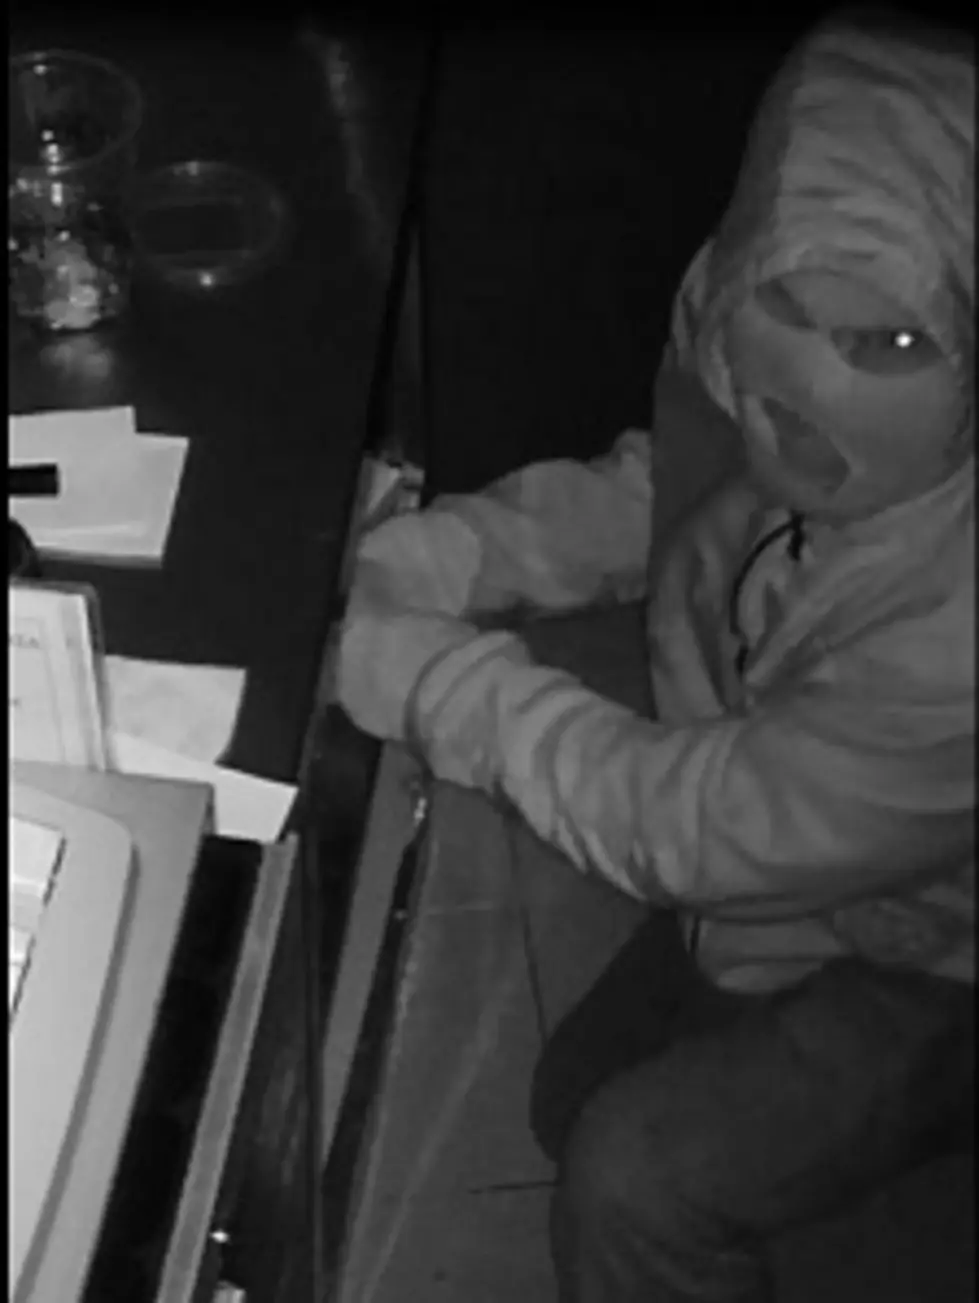 Gloversville Police Looking For Help Finding Person Who Robbed Mendetta’s